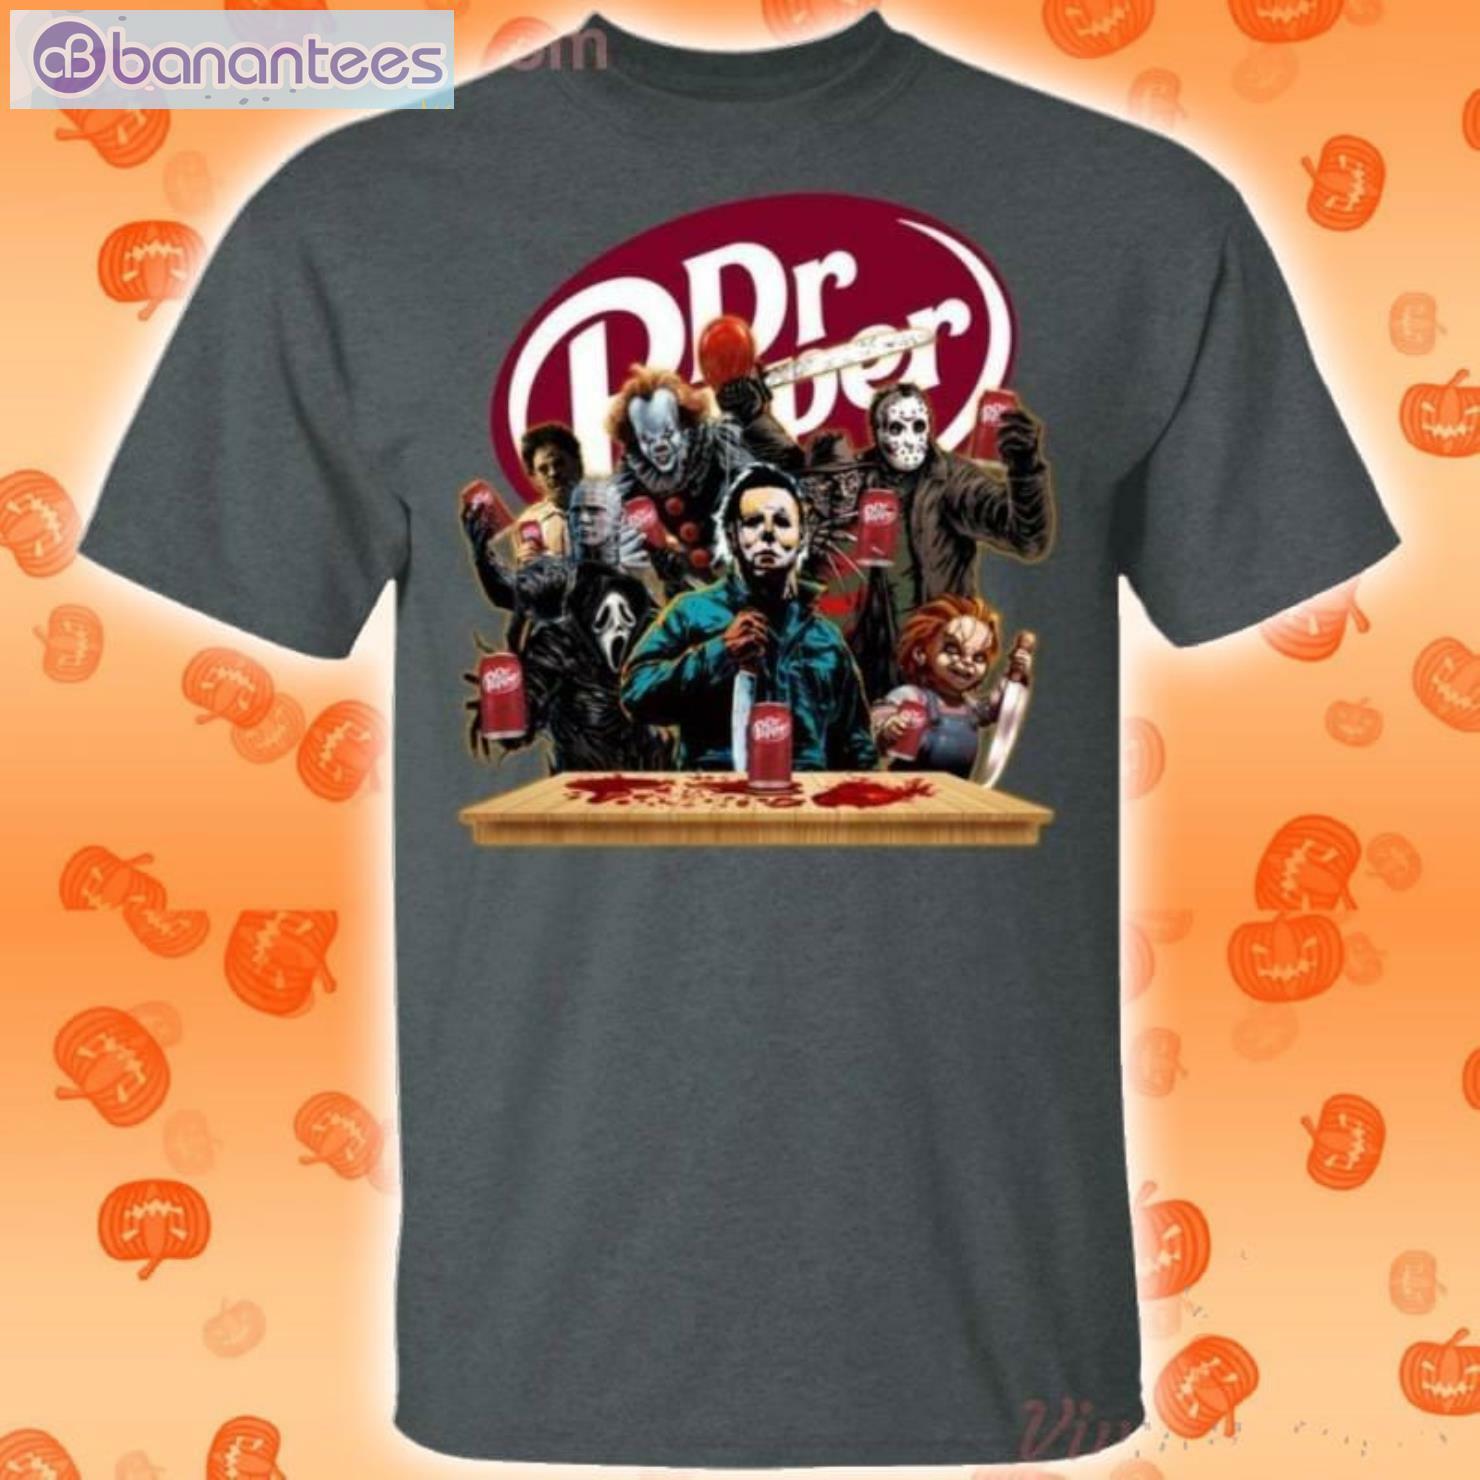 Horror Characters Drinking Dr Pepper Funny T-Shirt Product Photo 2 Product photo 2